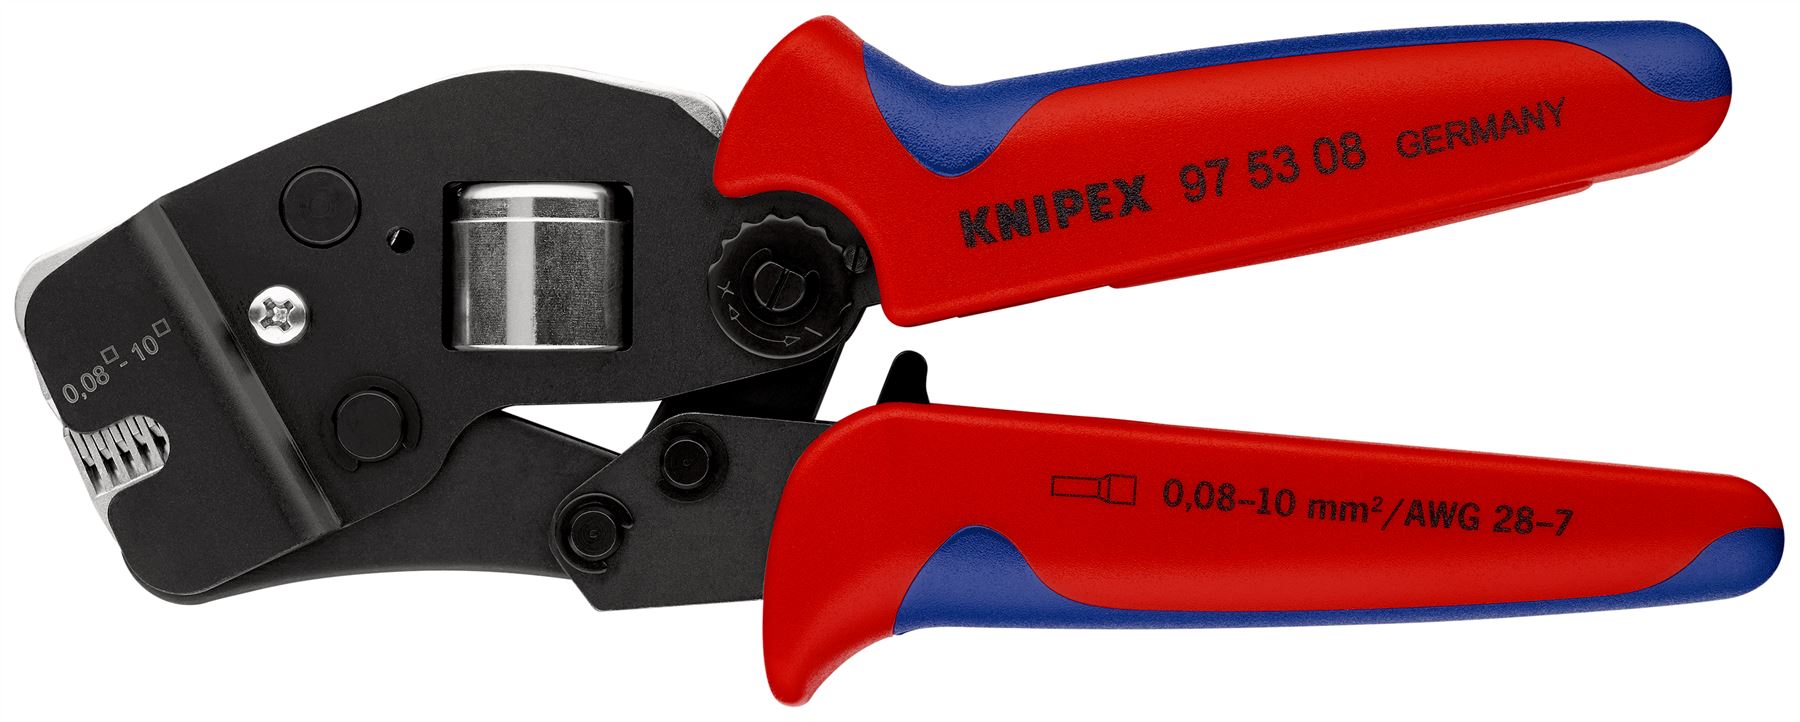 KNIPEX Self Adjusting Crimping Pliers for Wire Ferrules with Front Loading 0.08-10mm² 190mm Multi Component Grips 97 53 08